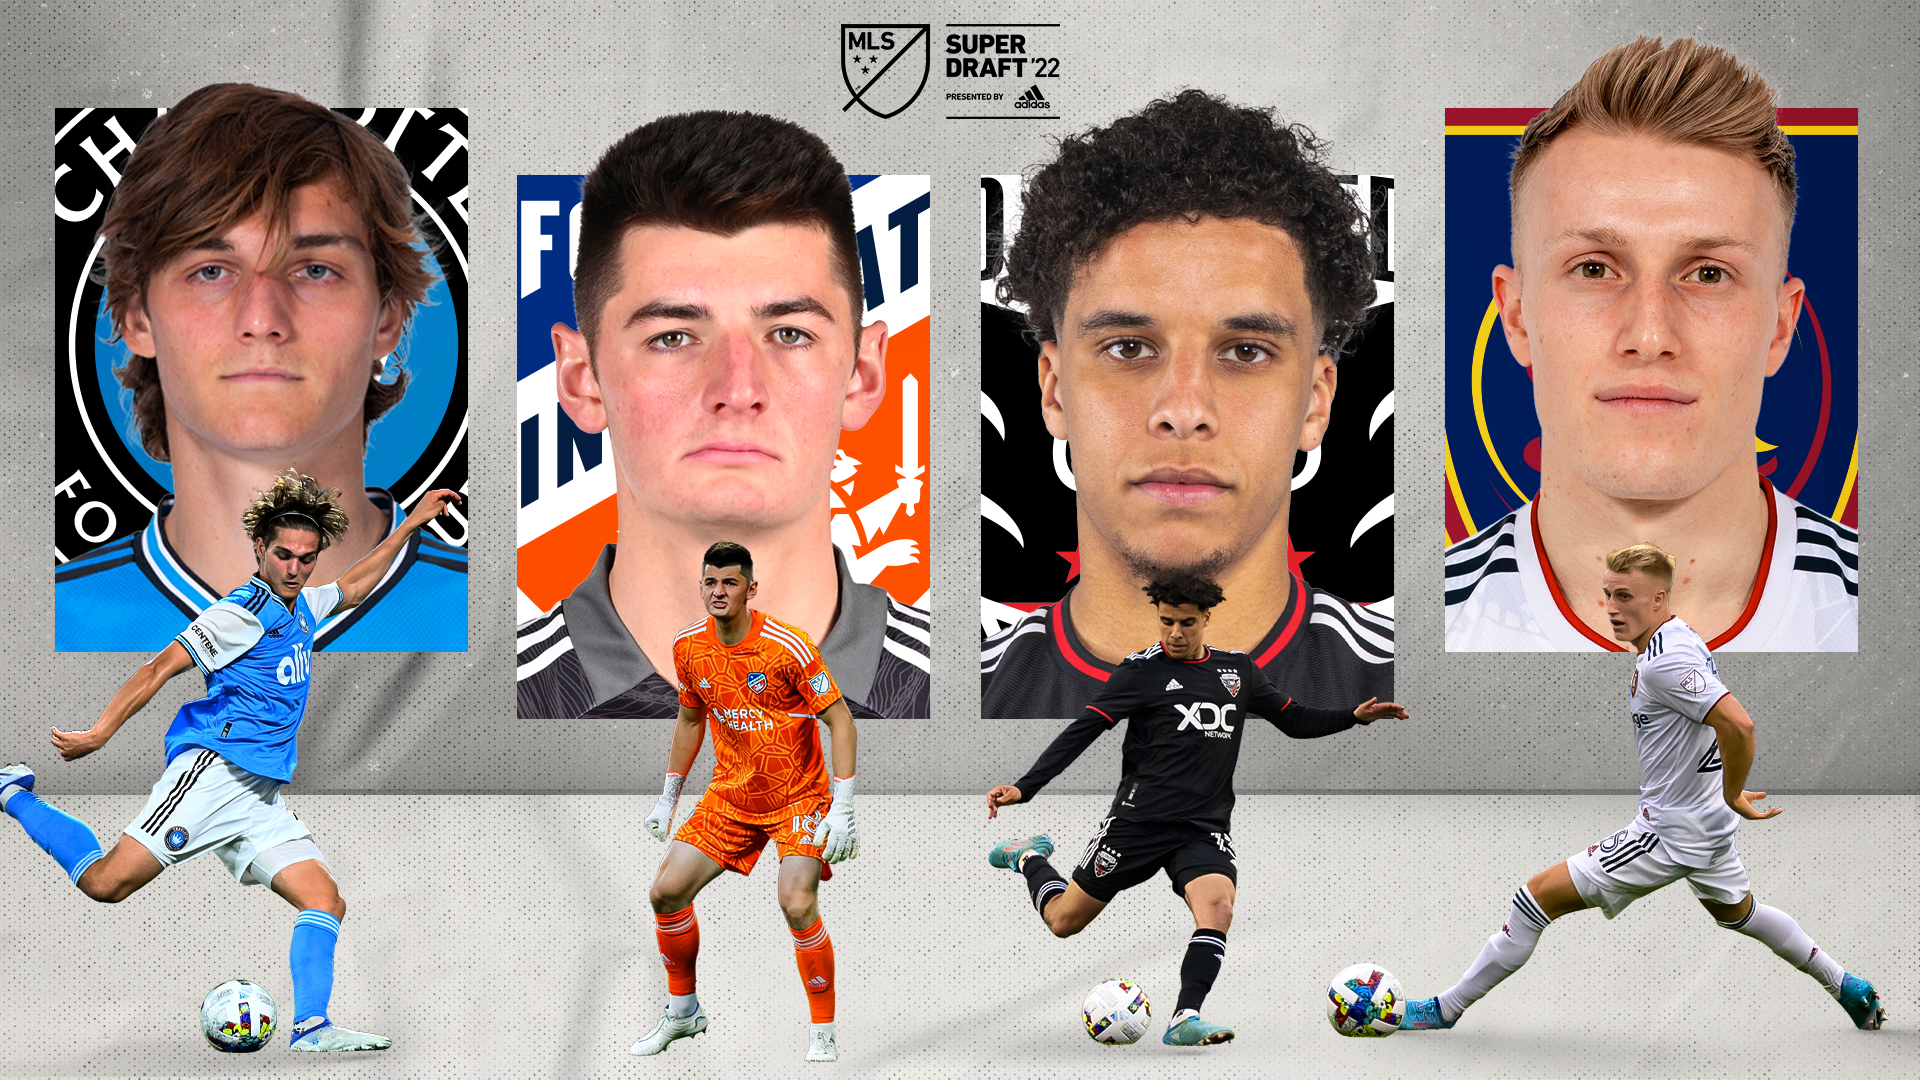 College to MLS: Which SuperDraft picks are most impactful in 2022?